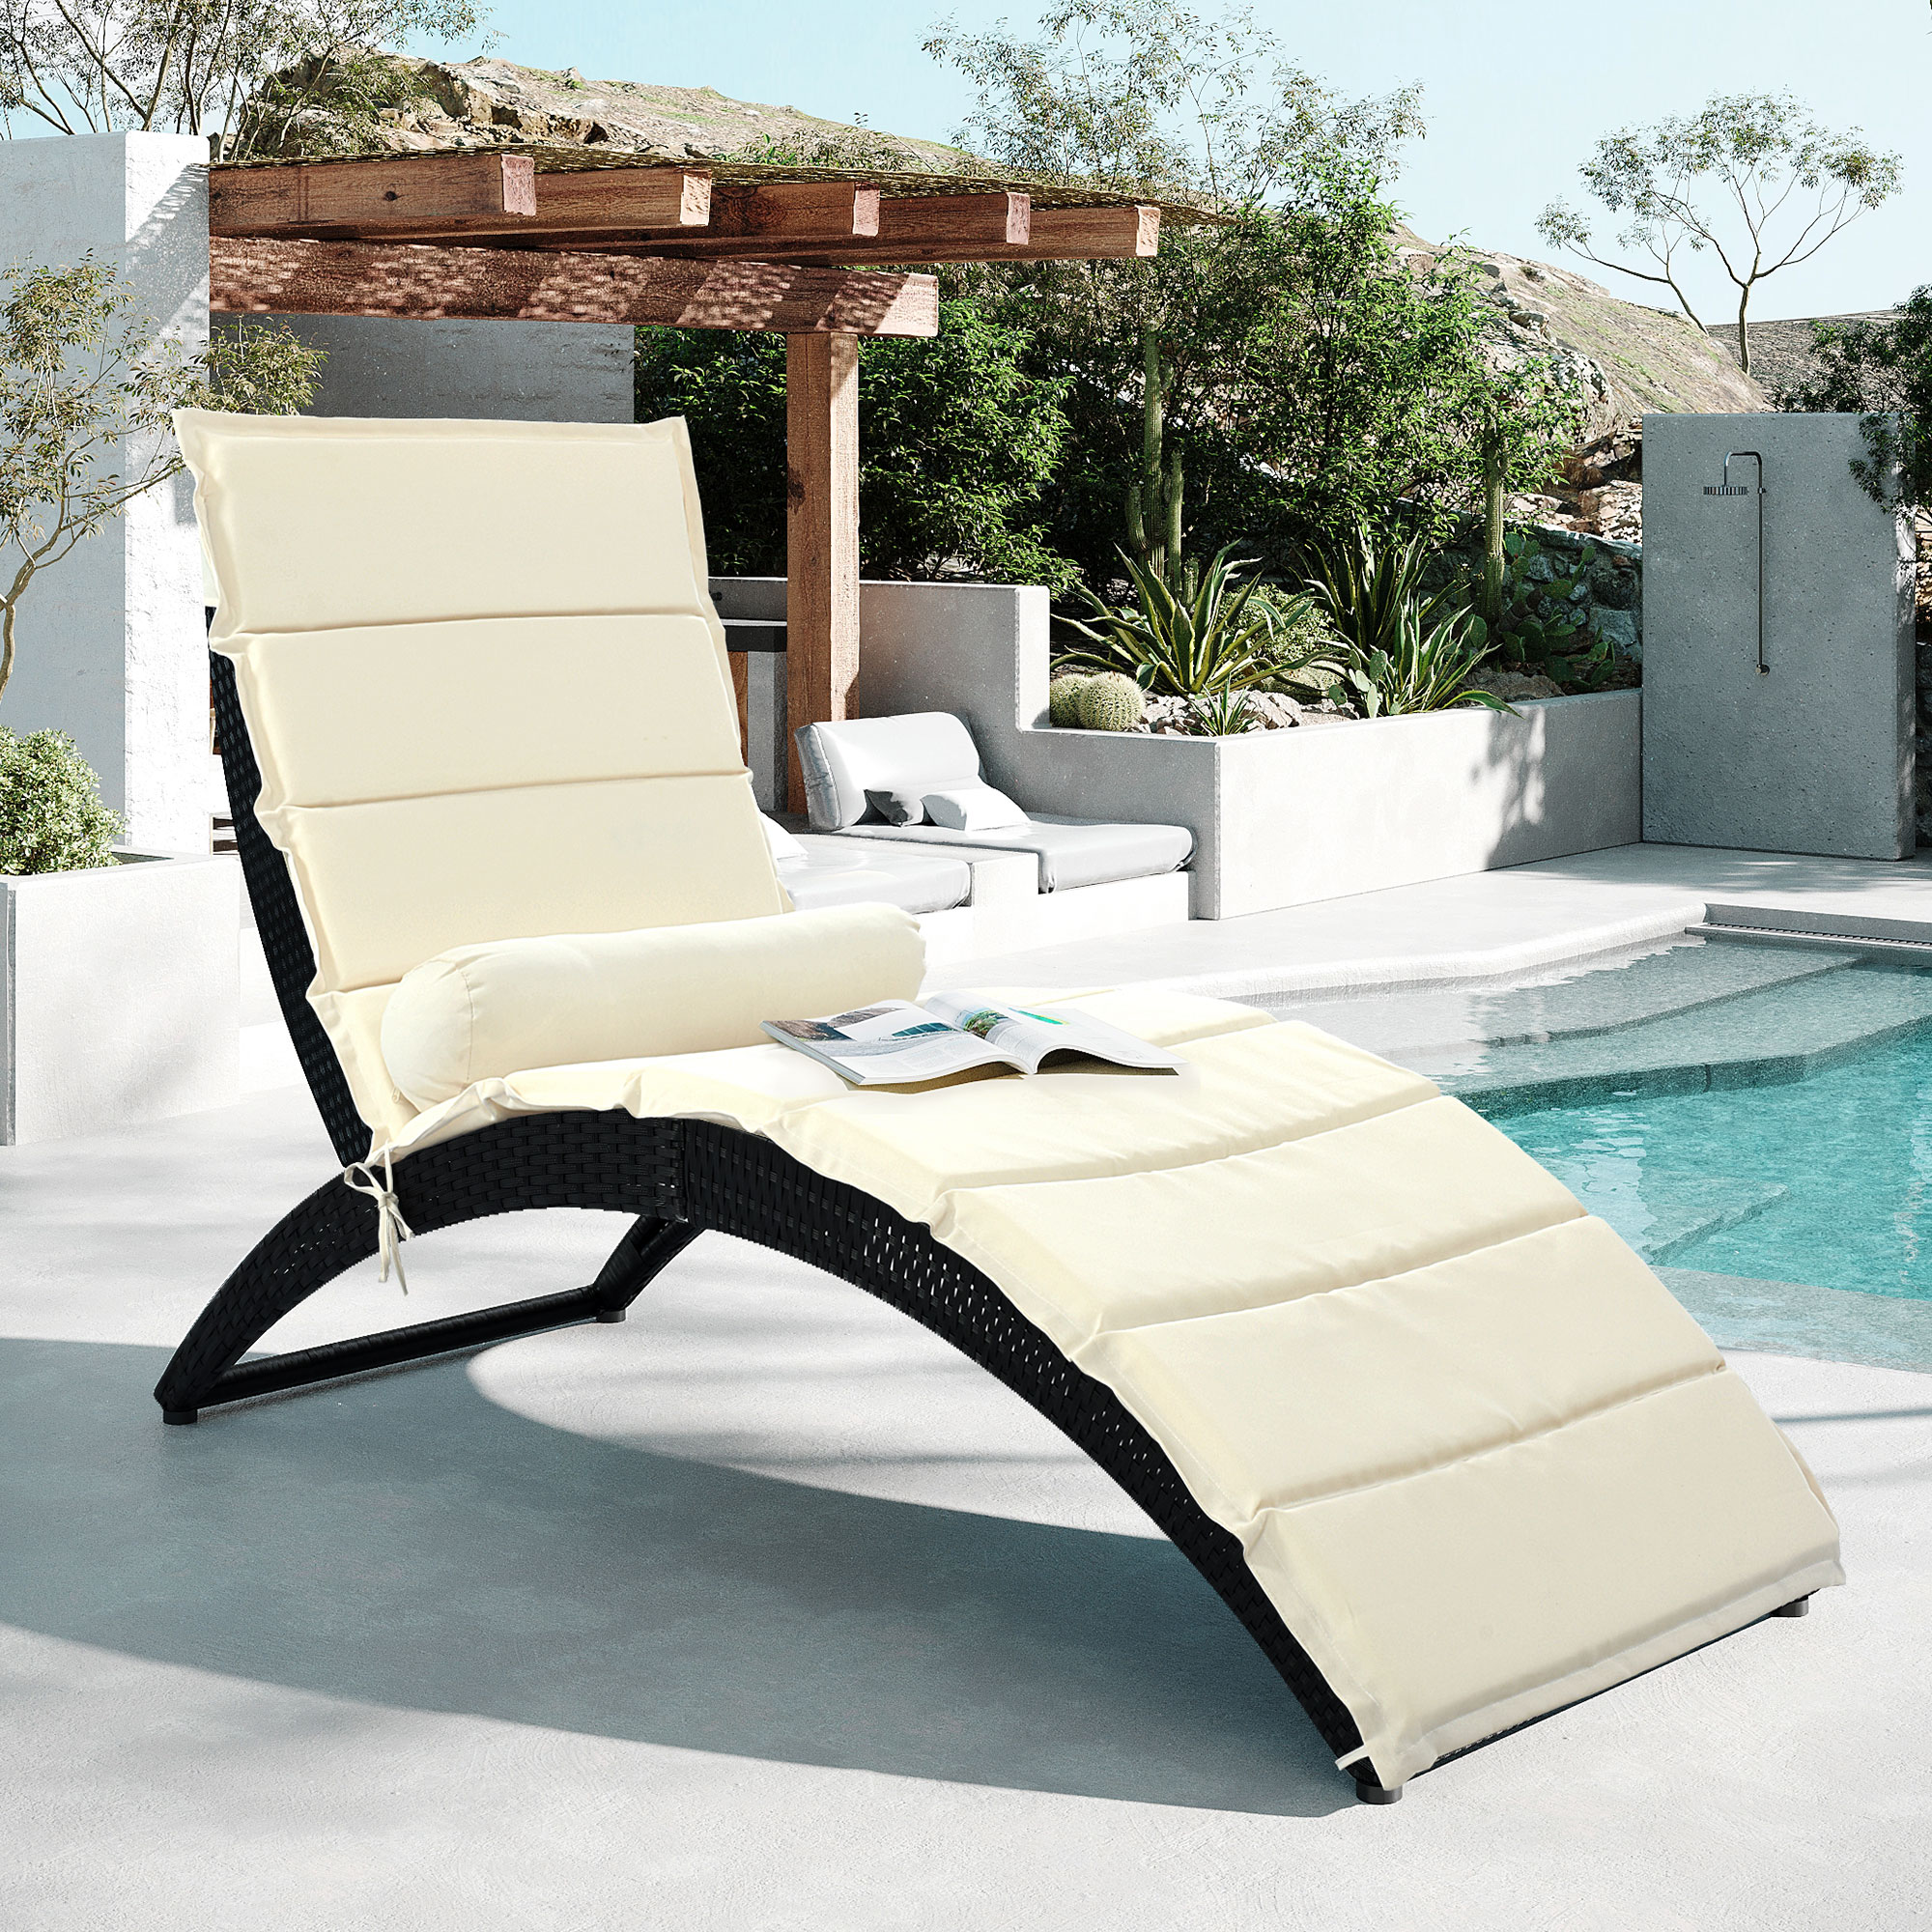 Patio Chaise Lounge, Folding Reclining Camping Chair, PE Rattan Sun Recliner Chair with Seat Cushion, Poolside Garden Outdoor Chaise Lounge Chairs, JA1105 - image 2 of 8